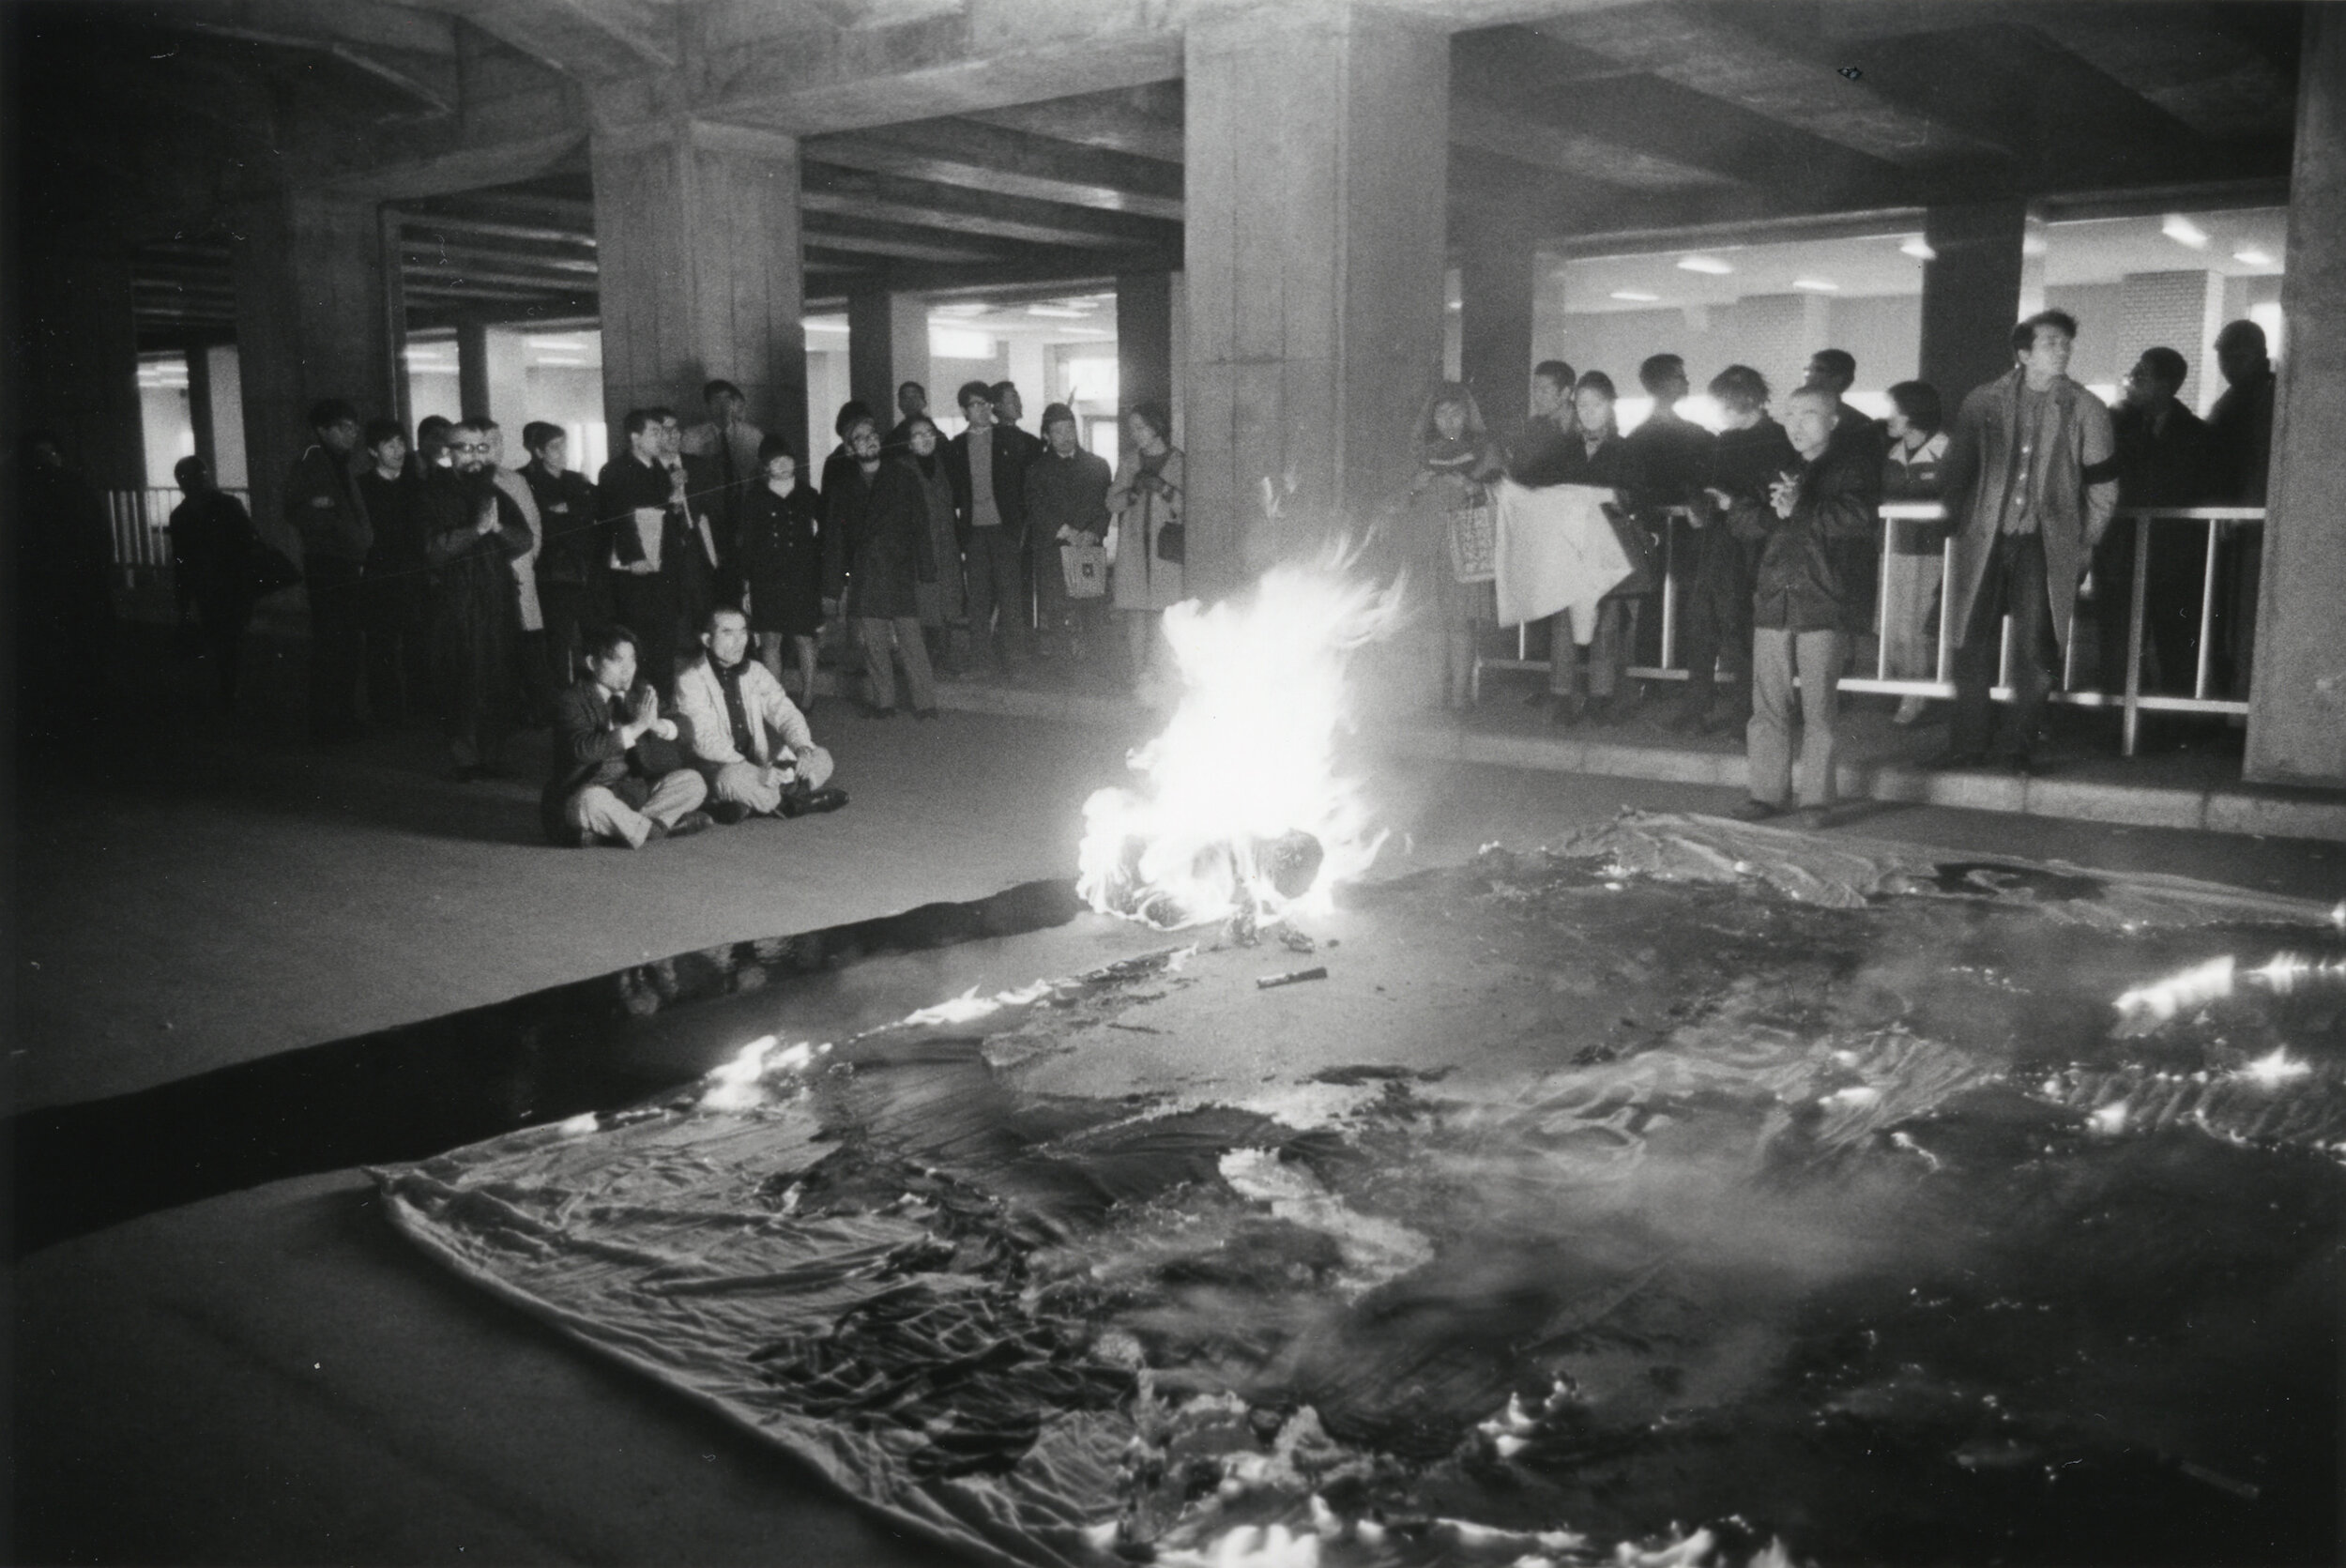  [fig. 5] National Memorial Ceremony for the Late Chūnoshin Yui, at Shinjuku West Gate, December 1, 1967. photo by Hirata Minoru / © HM Archive / Courtesy of Taka Ishii Gallery Photography / Film 